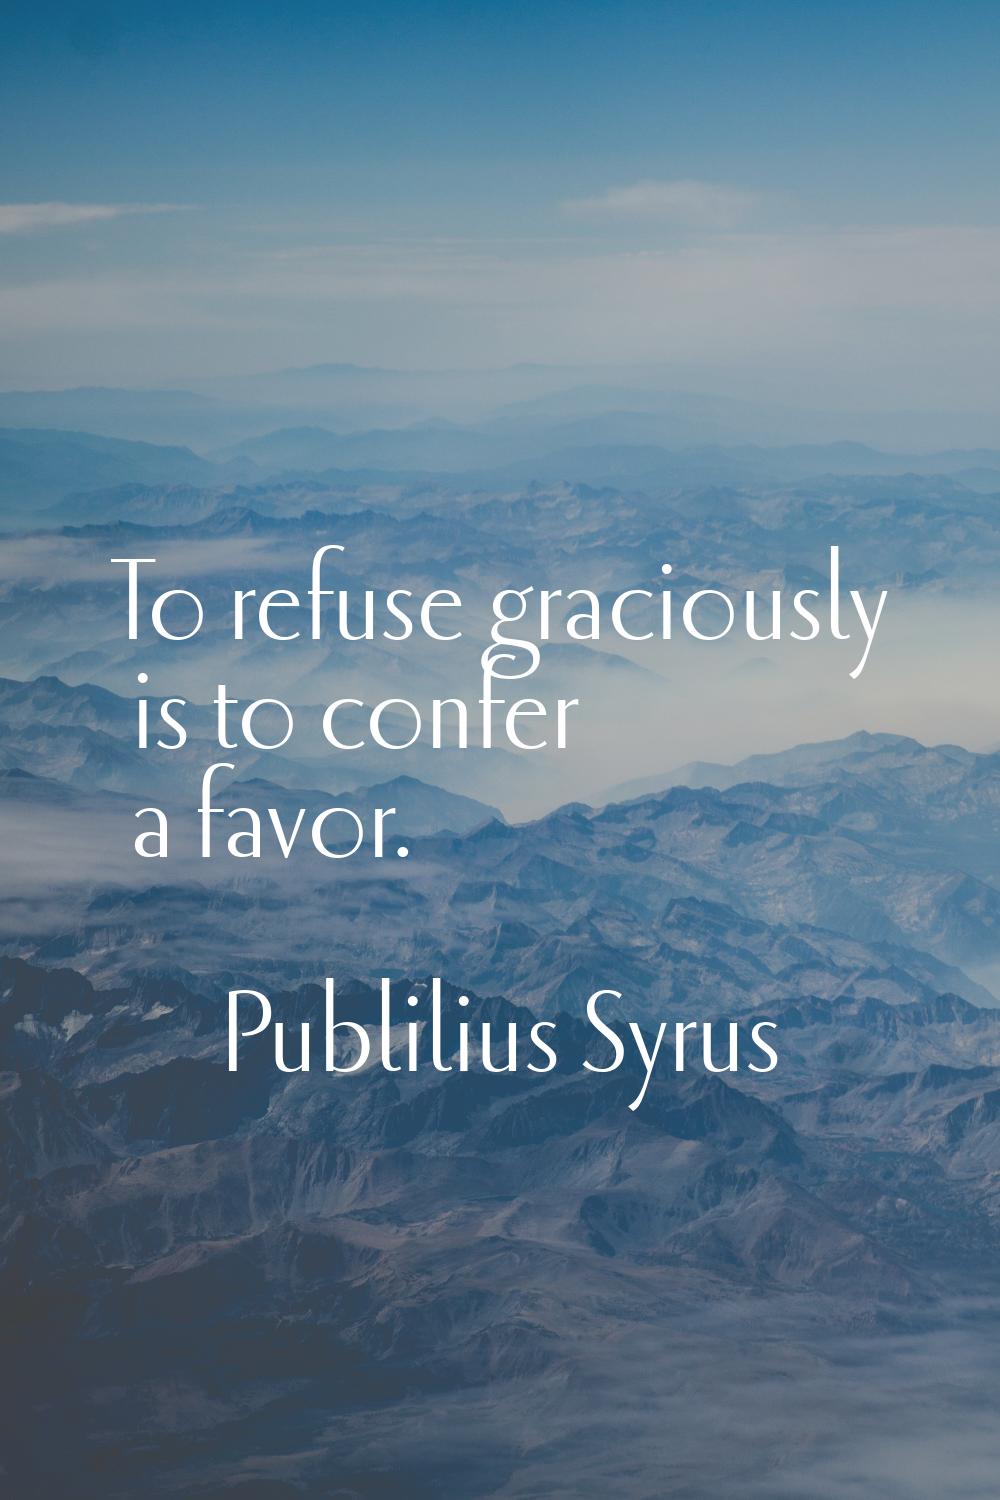 To refuse graciously is to confer a favor.